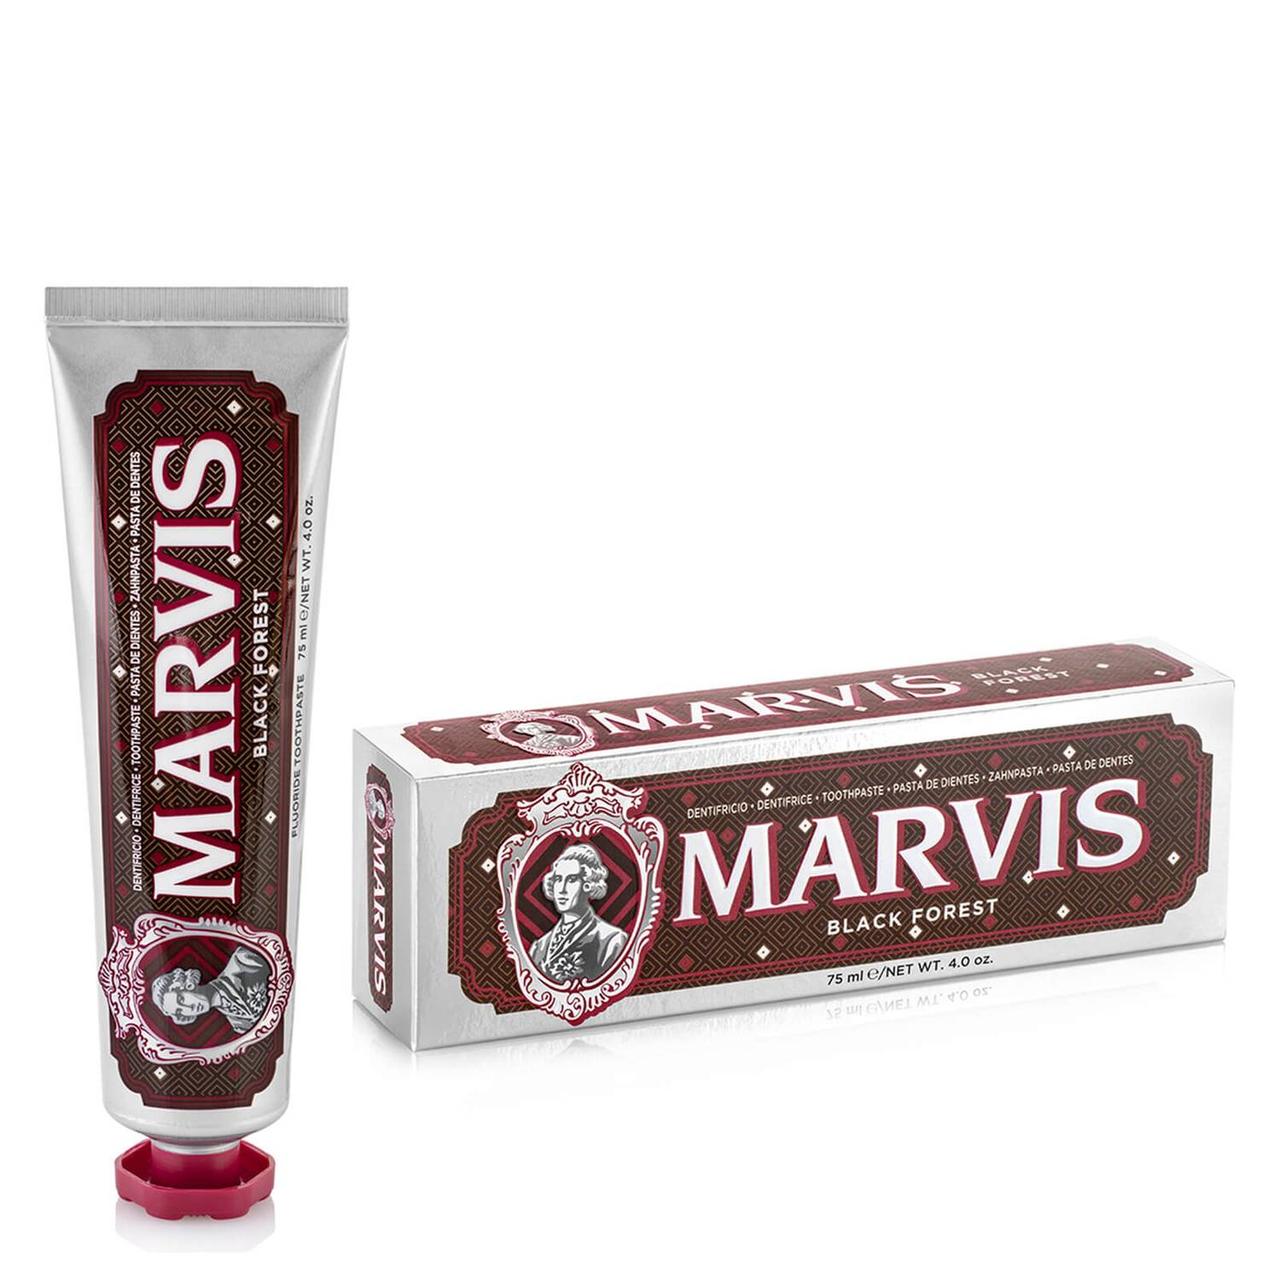 Зубная паста Marvis Black Forest Toothpaste - фото 2 - id-p222456706